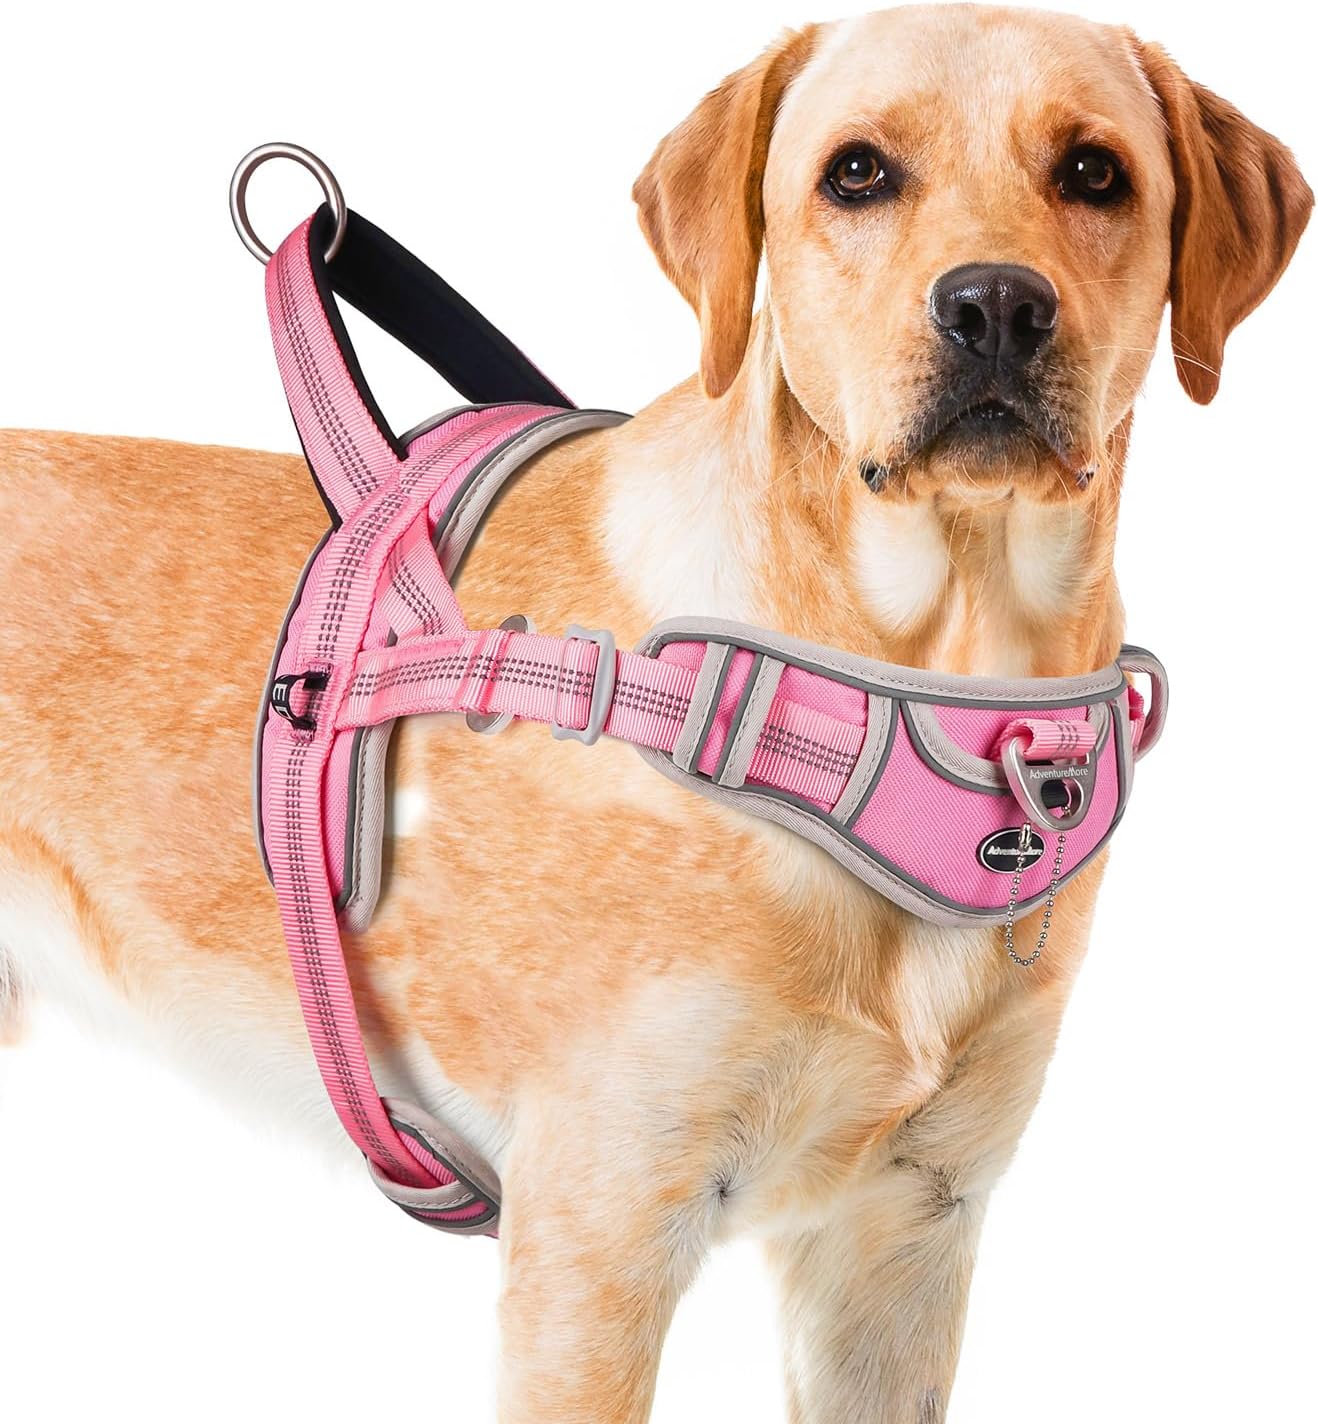 ADVENTUREMORE No Pull Dog Harness for Large Dogs, Sport Dog Halter Harness Reflective Breathable Dog Vest Escape Proof Dog Harness with Easy Control Front Clip Handle for Training Walking L Pink